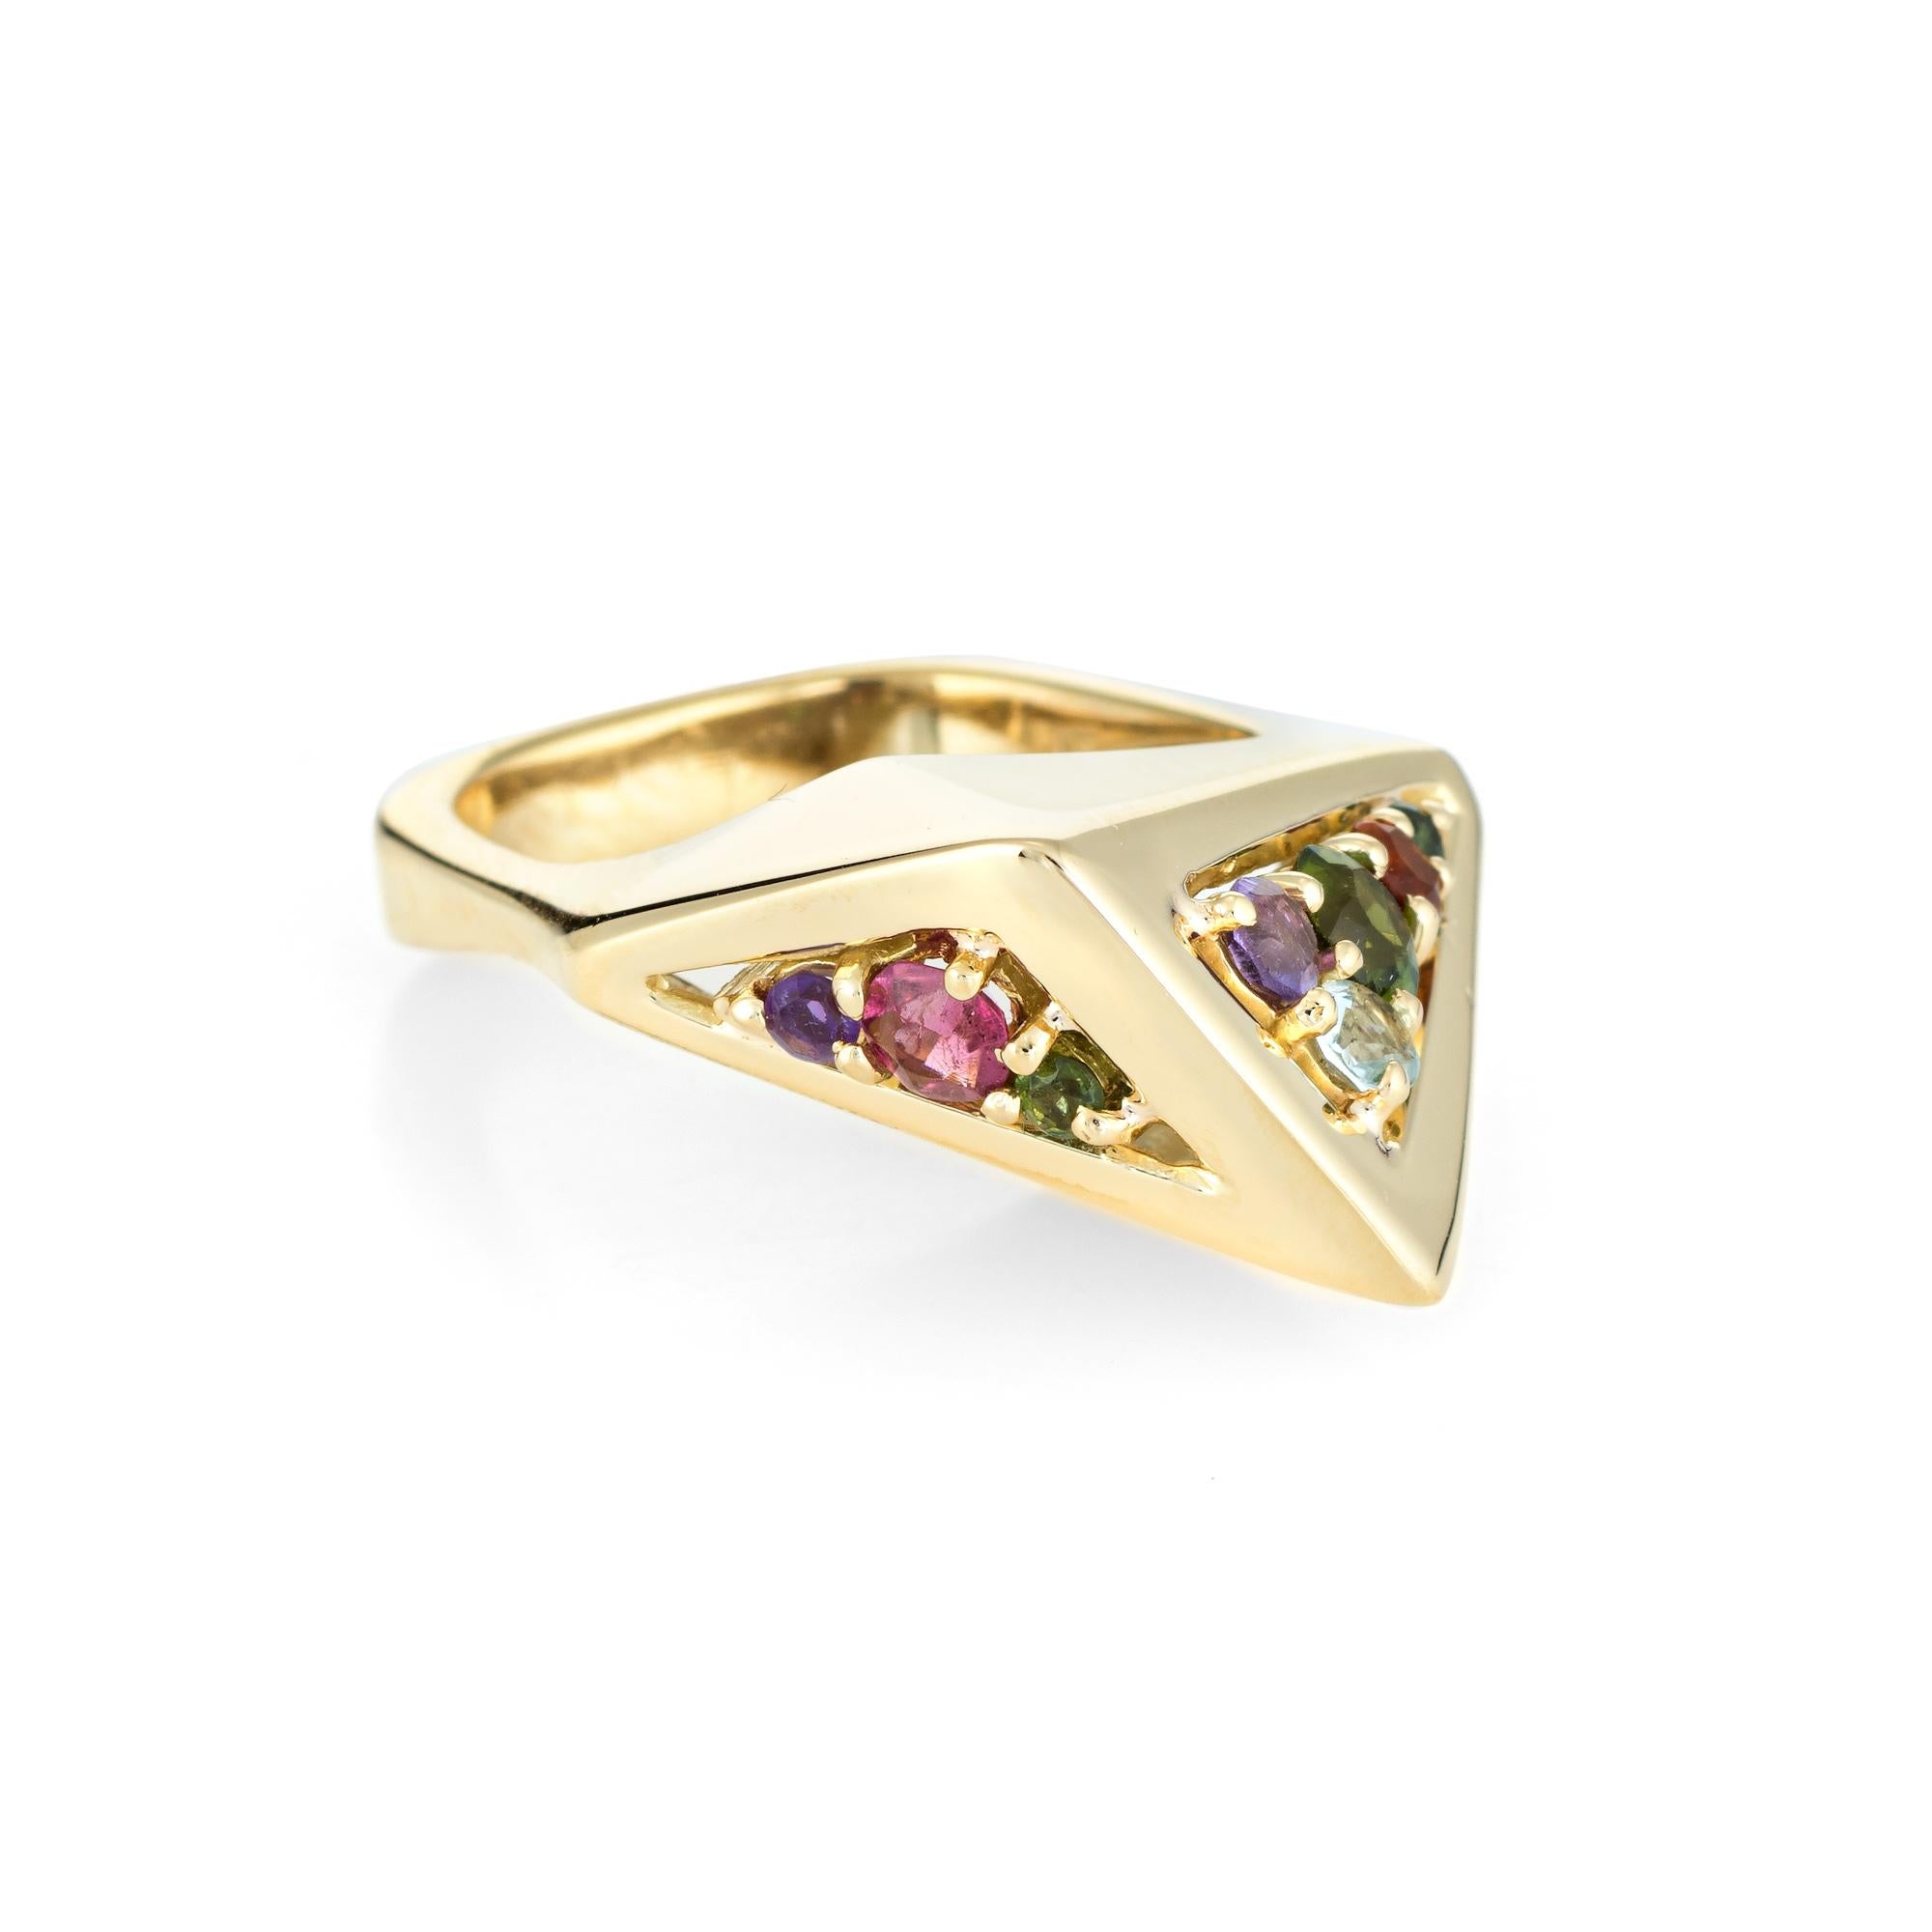 Distinct H Stern geometric multi colored gemstone cocktail ring (circa 1980s), crafted in 18 karat yellow gold. 

Semi-precious gemstones (aquamarine, amethyst, pink & green tourmaline & citrine) are cut in various sizes from 0.05 to 0.20 carats and